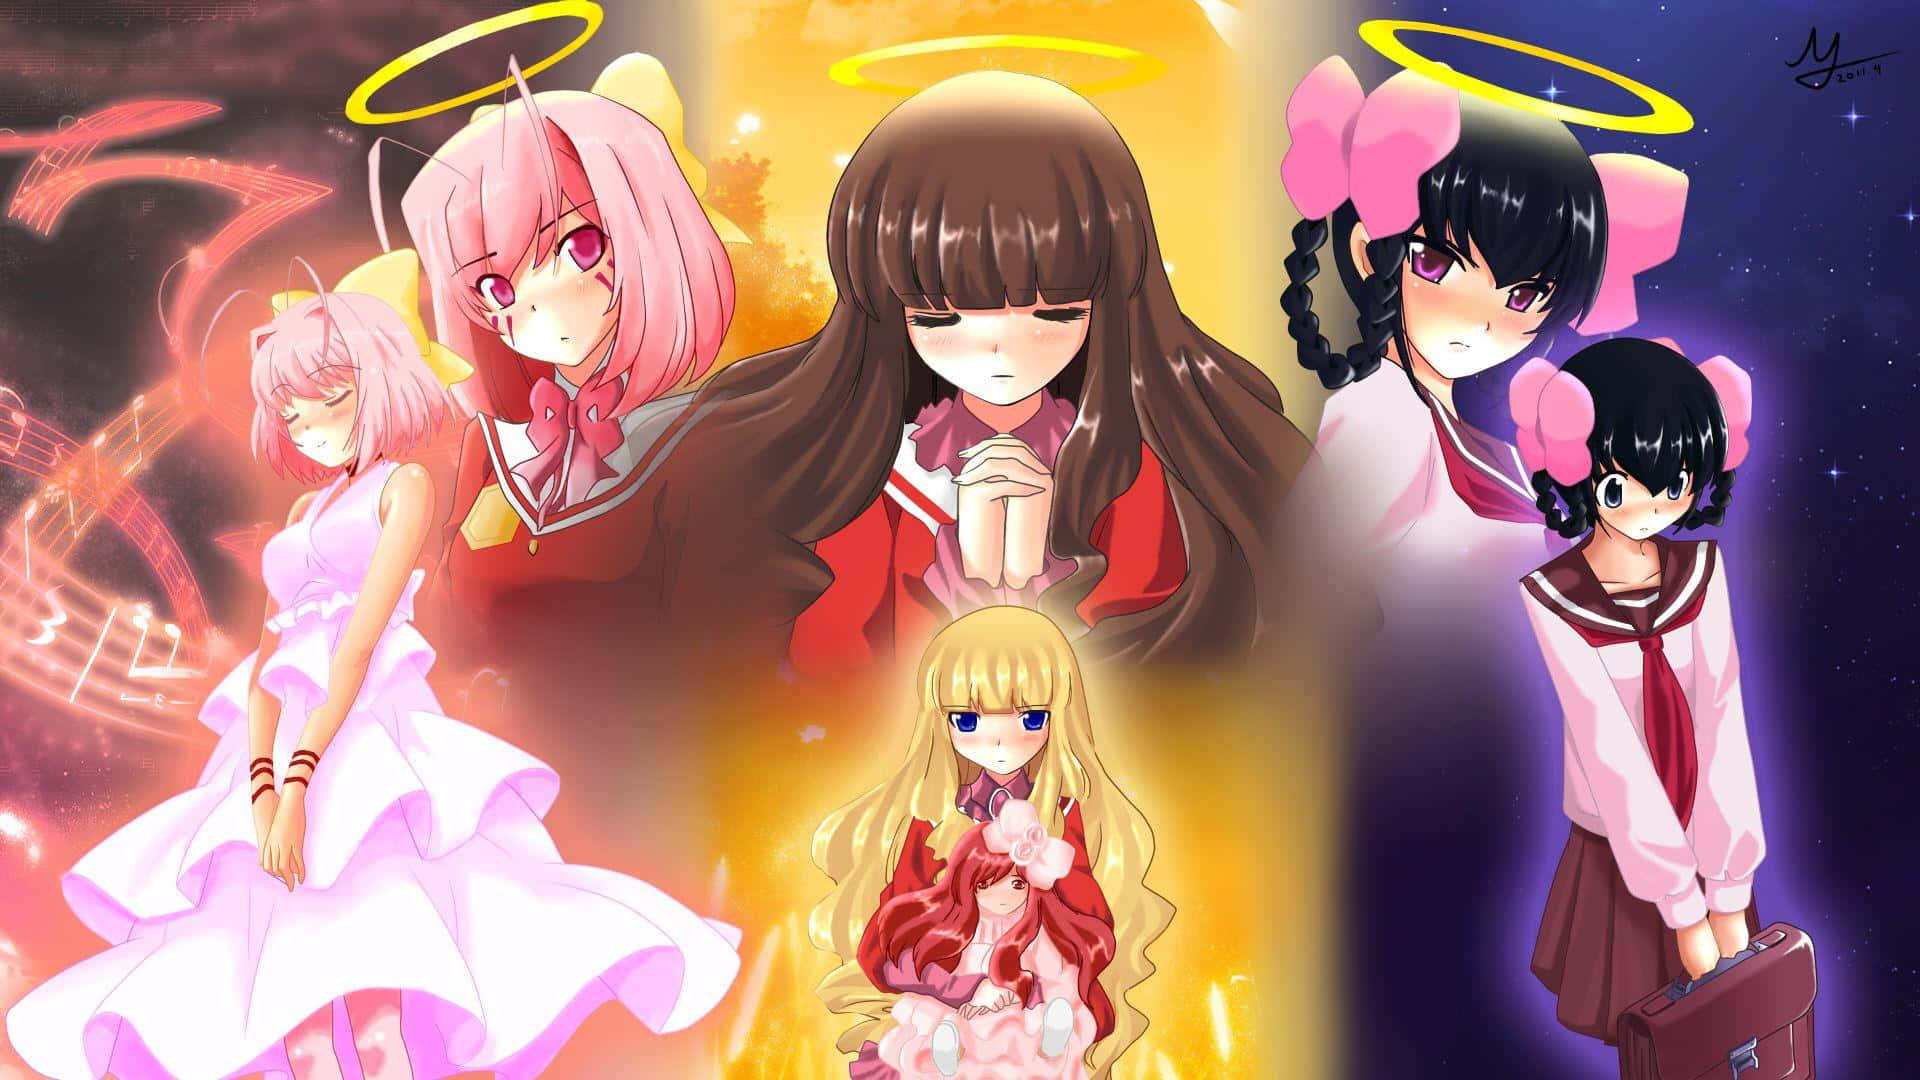 Animated Characters Introducing An Otherworldly Theme In "the World God Only Knows." Wallpaper